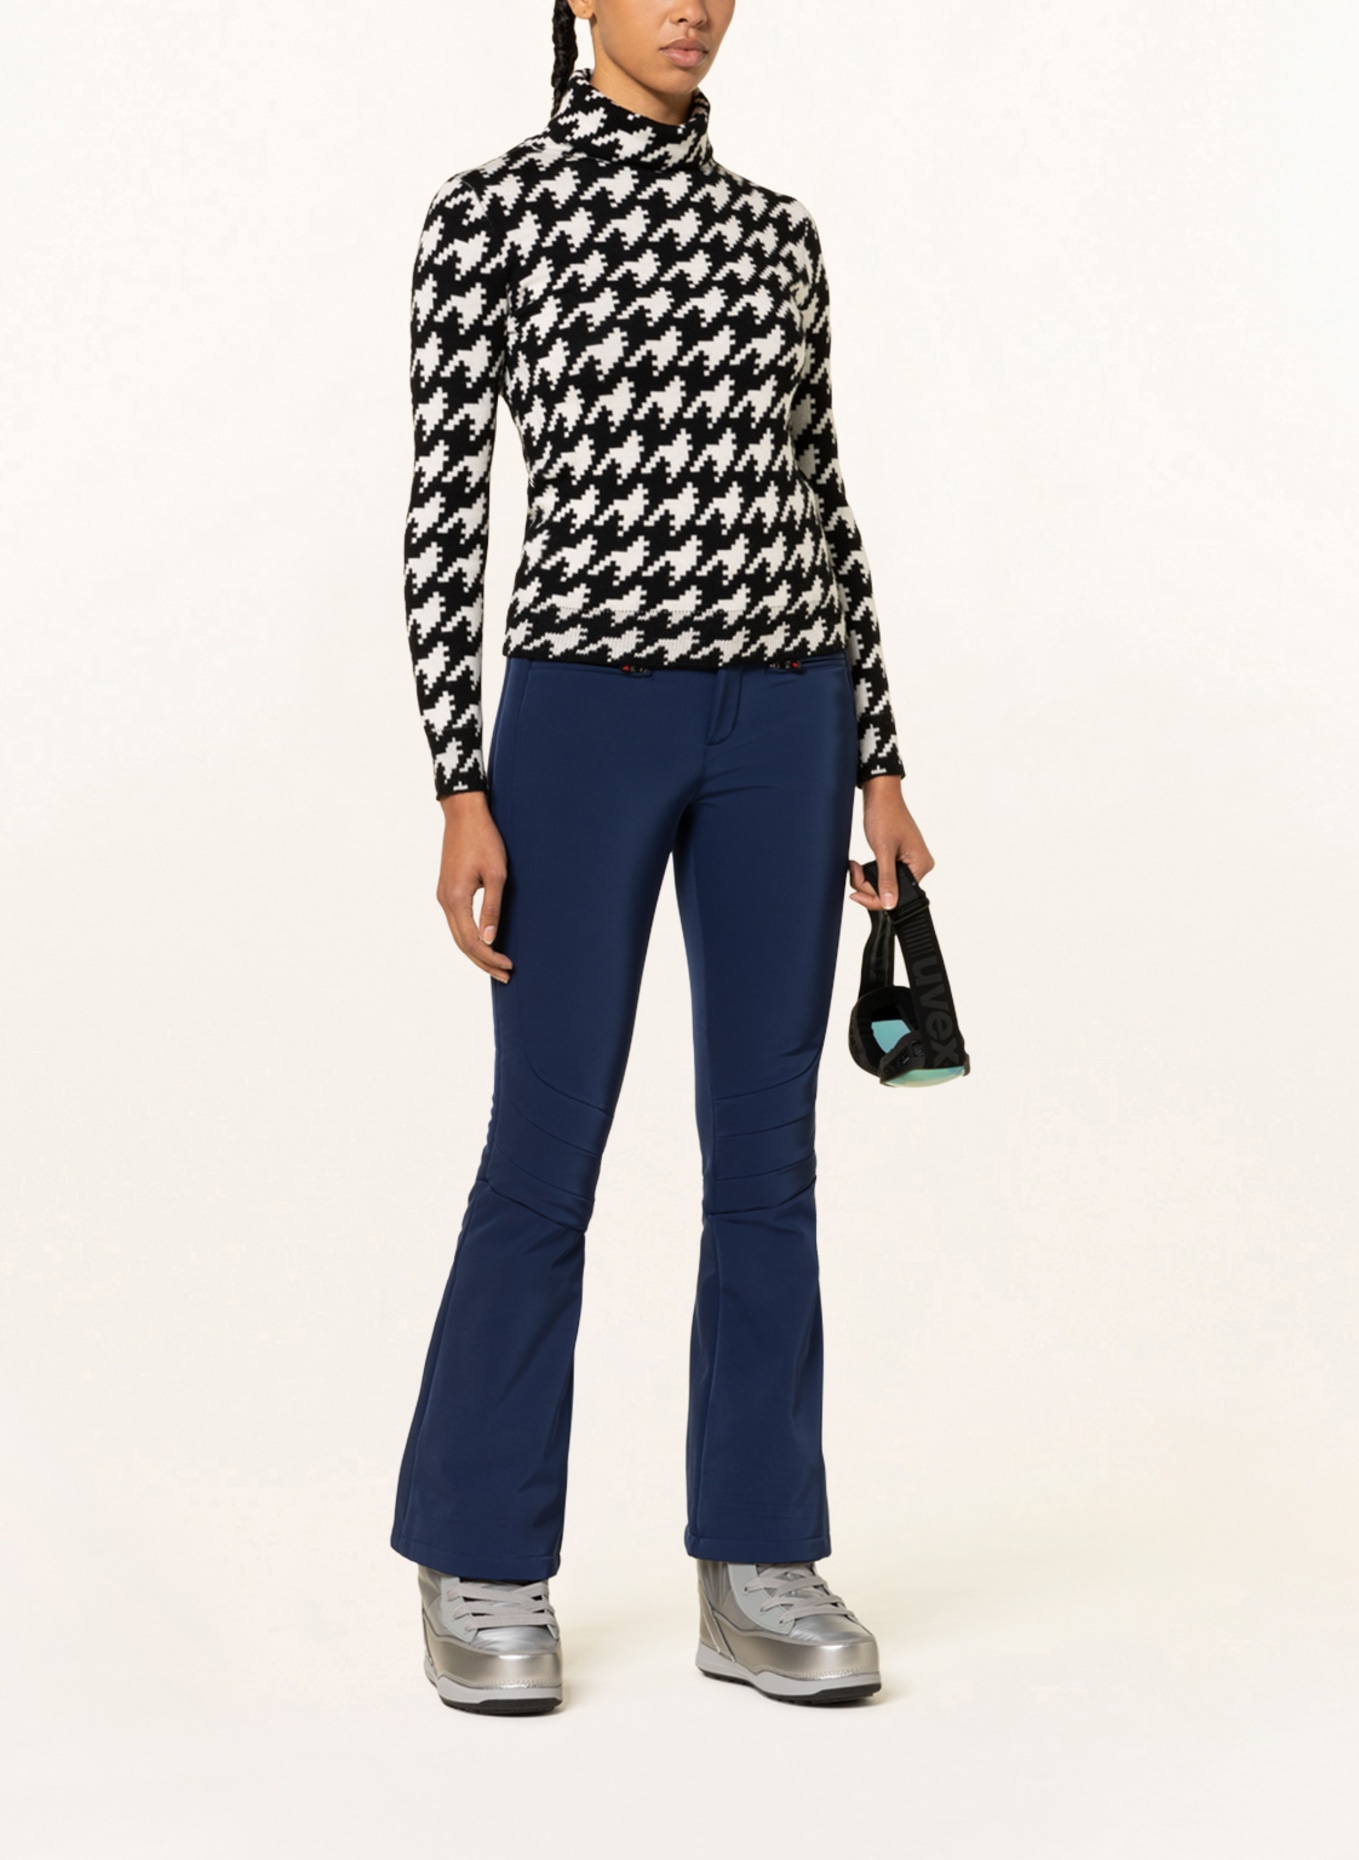 PERFECT MOMENT Turtleneck sweater HOUNDSTOOTH made of merino wool, Color: BLACK/ WHITE (Image 2)